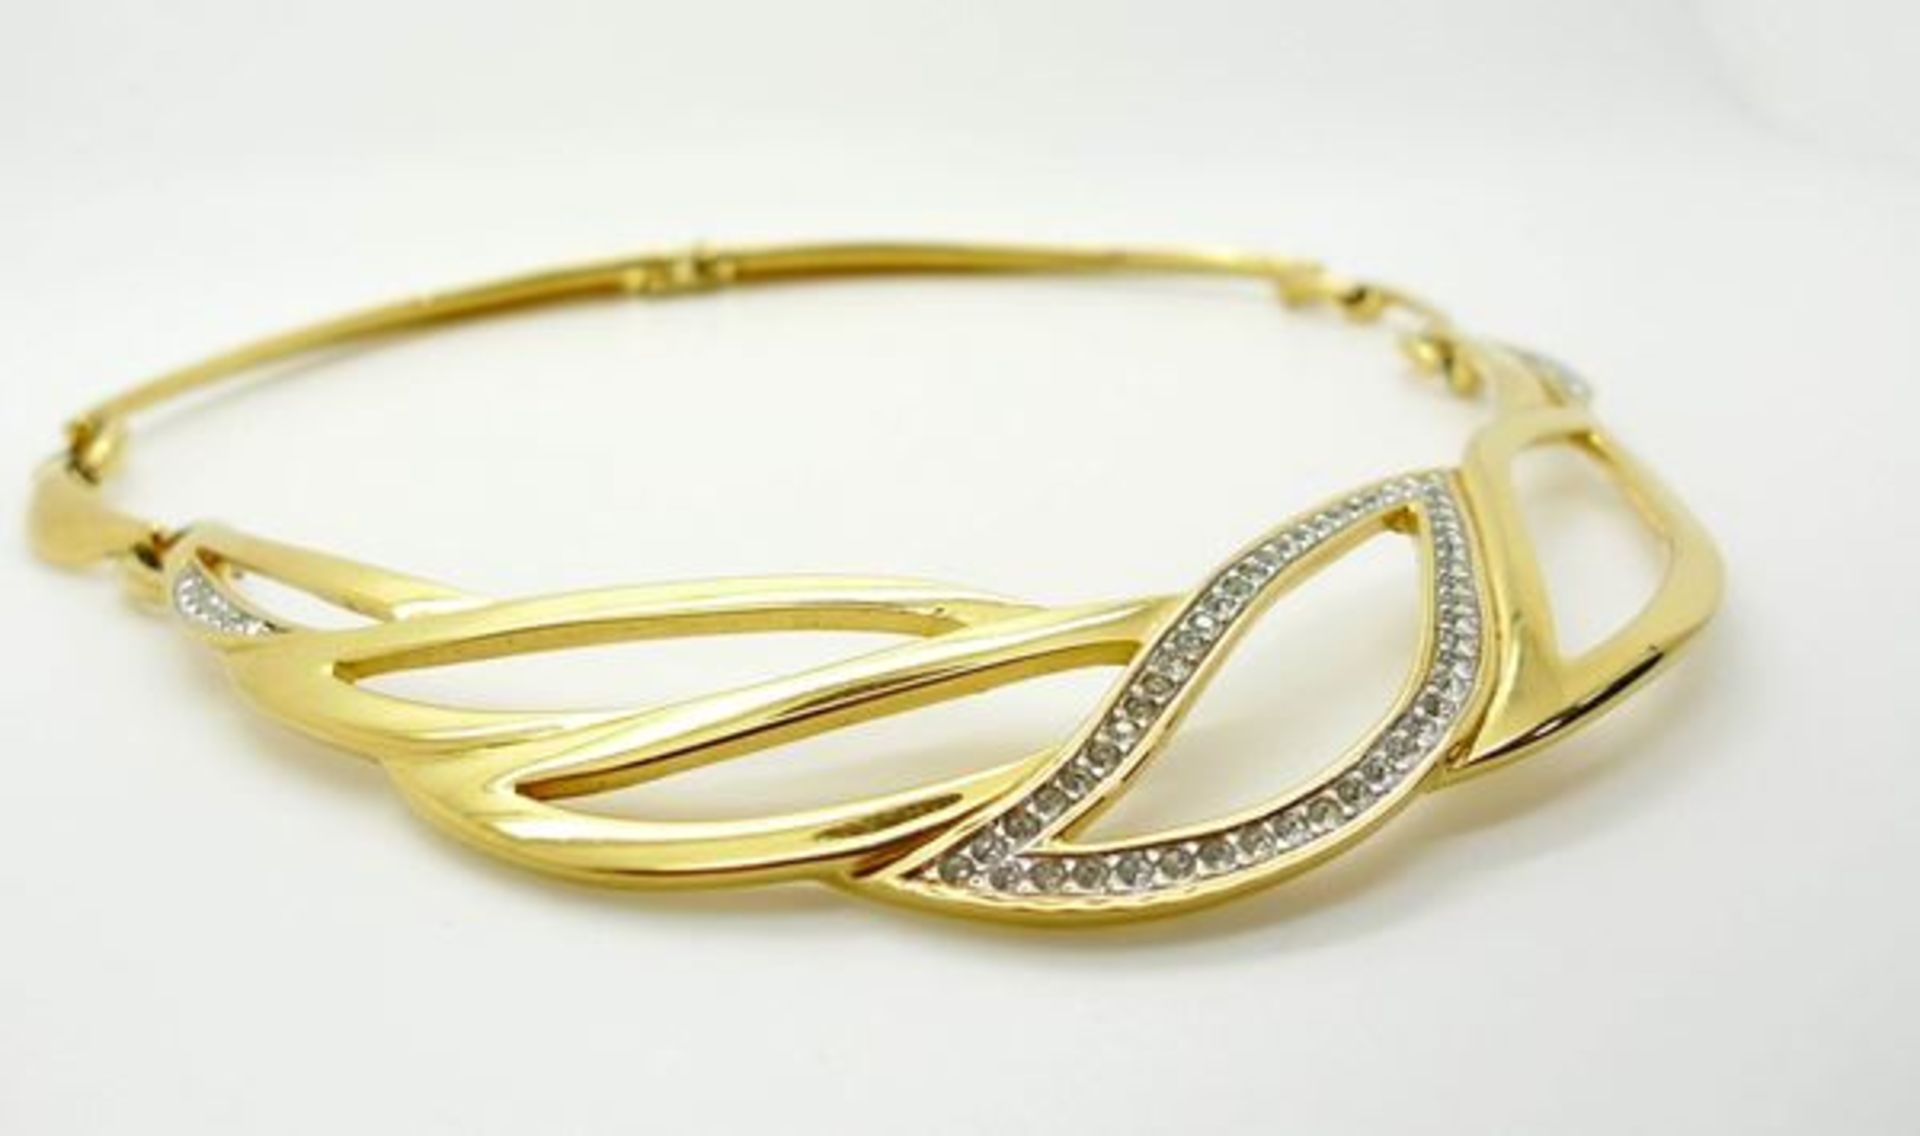 Vintage Monet Gold Tone And Diamante Choker - Image 2 of 4